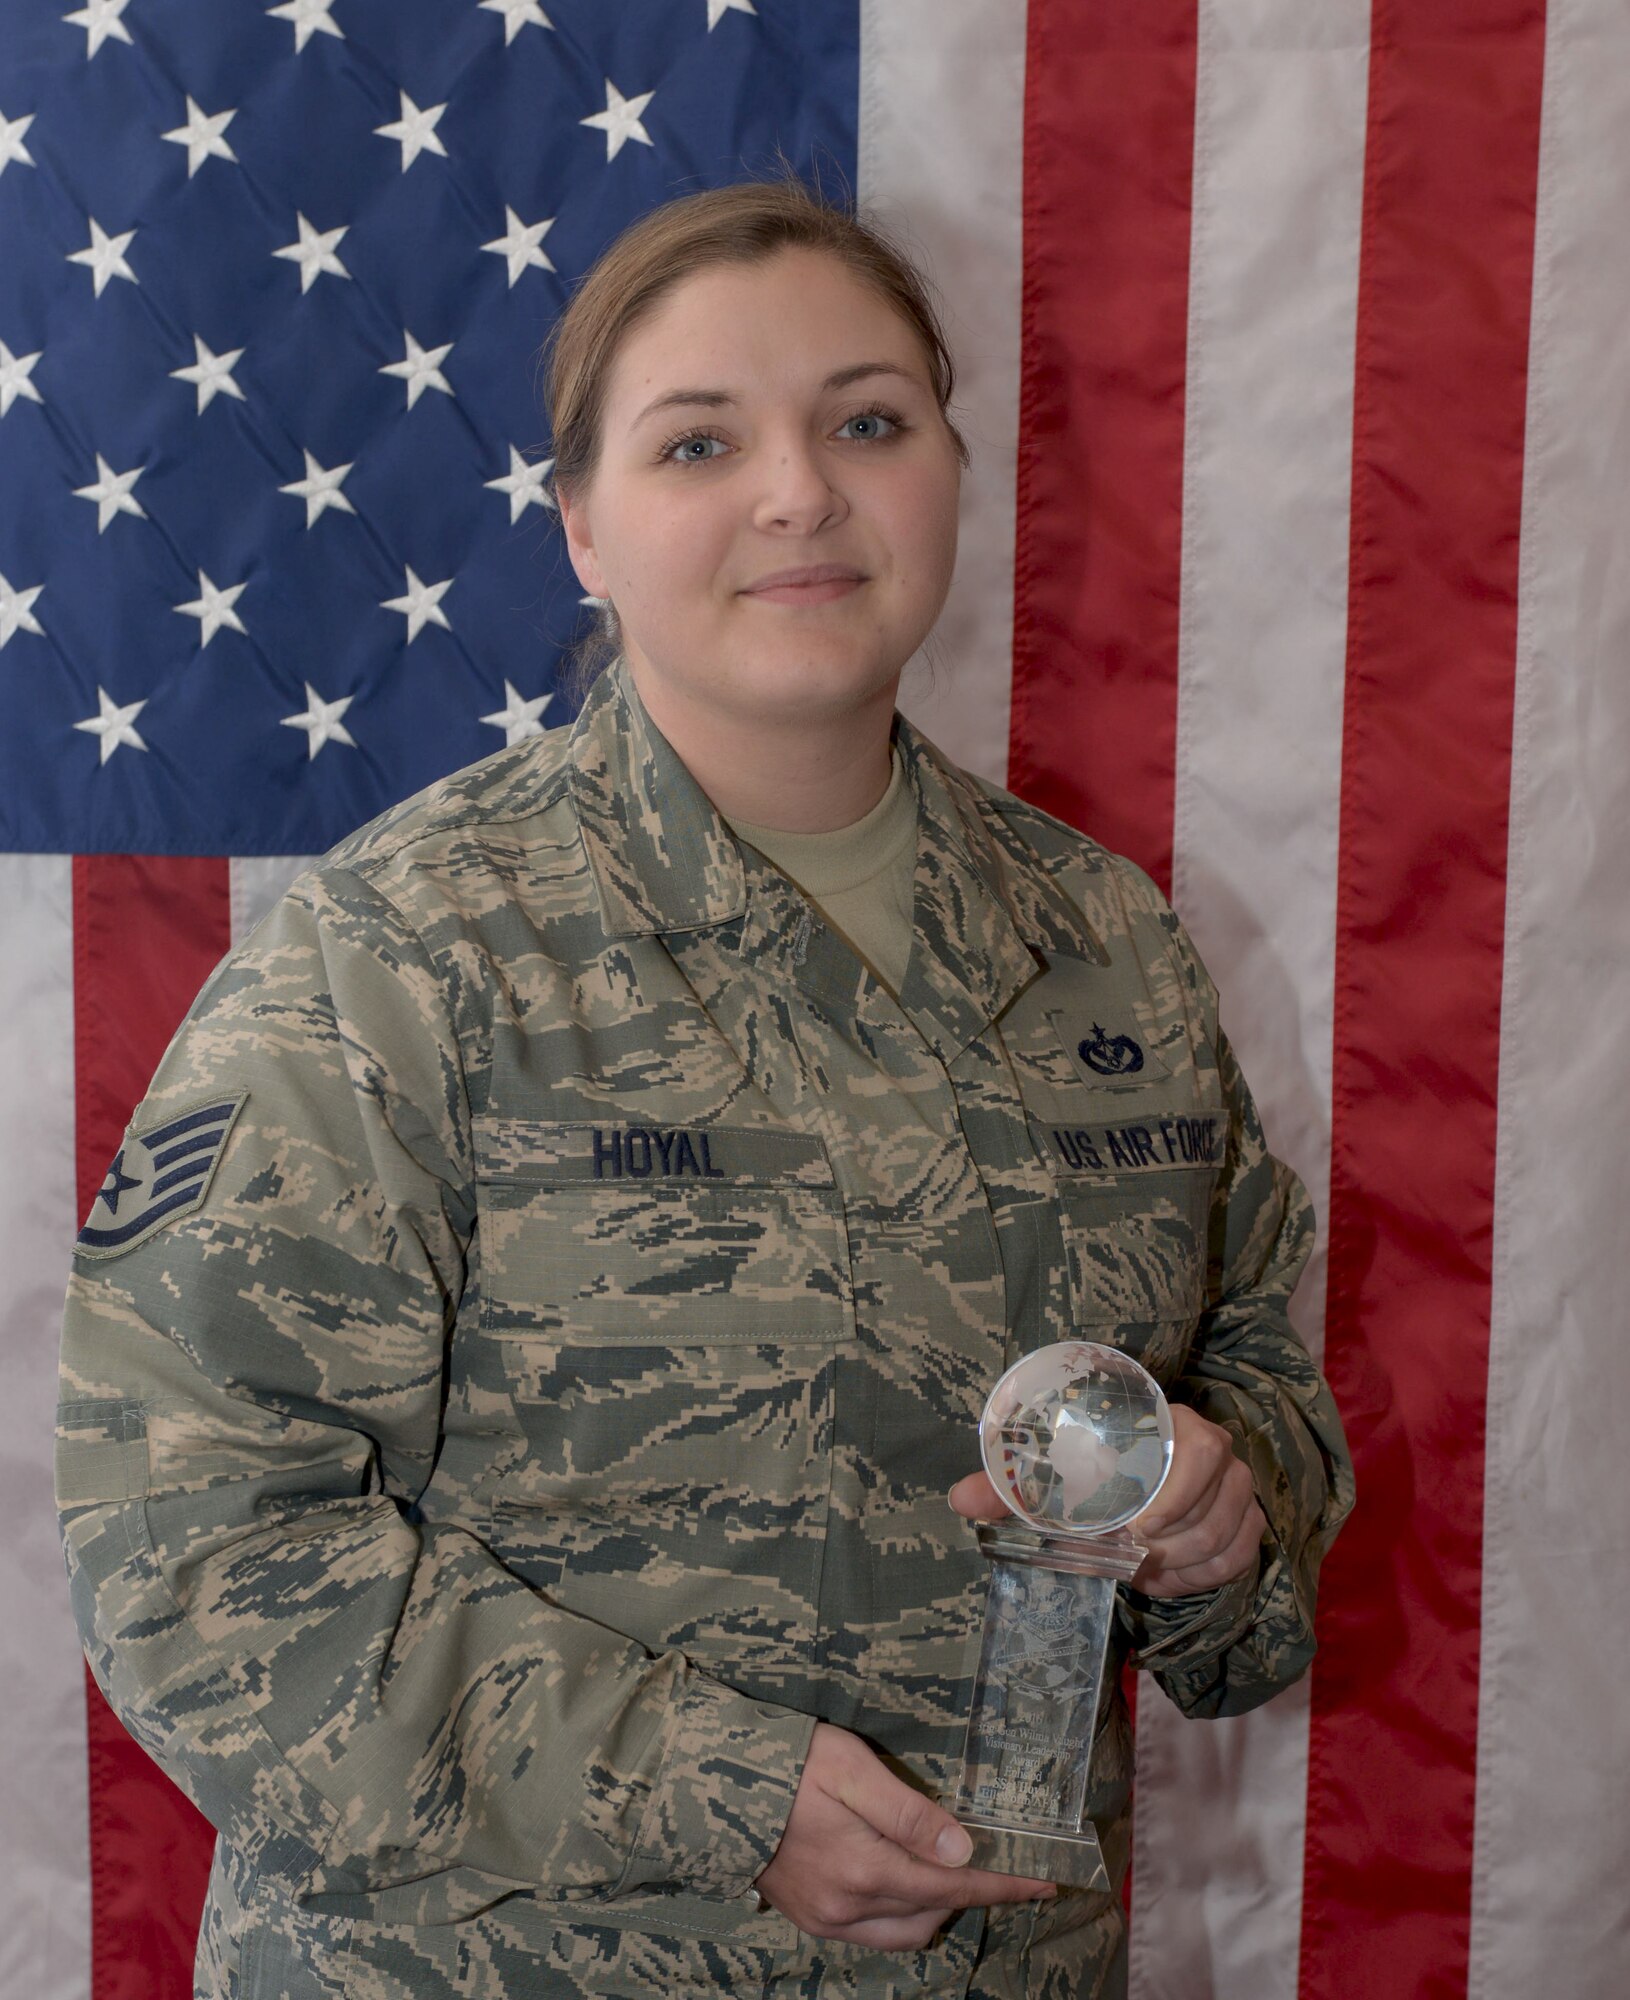 Staff Sgt. Michelle Hoyal, an honor guard flight sergeant assigned to the 28th Force Support Squadron, recently received the General Vaught Award for 2016, at Ellsworth Air Force Base, S.D. The General Vaught Awards were created in honor of Brigadier General Wilma Vaught, a remarkable female general in the United States Air Force, for her outstanding service and dedication to the Air Force and nation both during her career and after her retirement. (U.S. Air Force photo by Airman 1st Class Donald C. Knechtel)